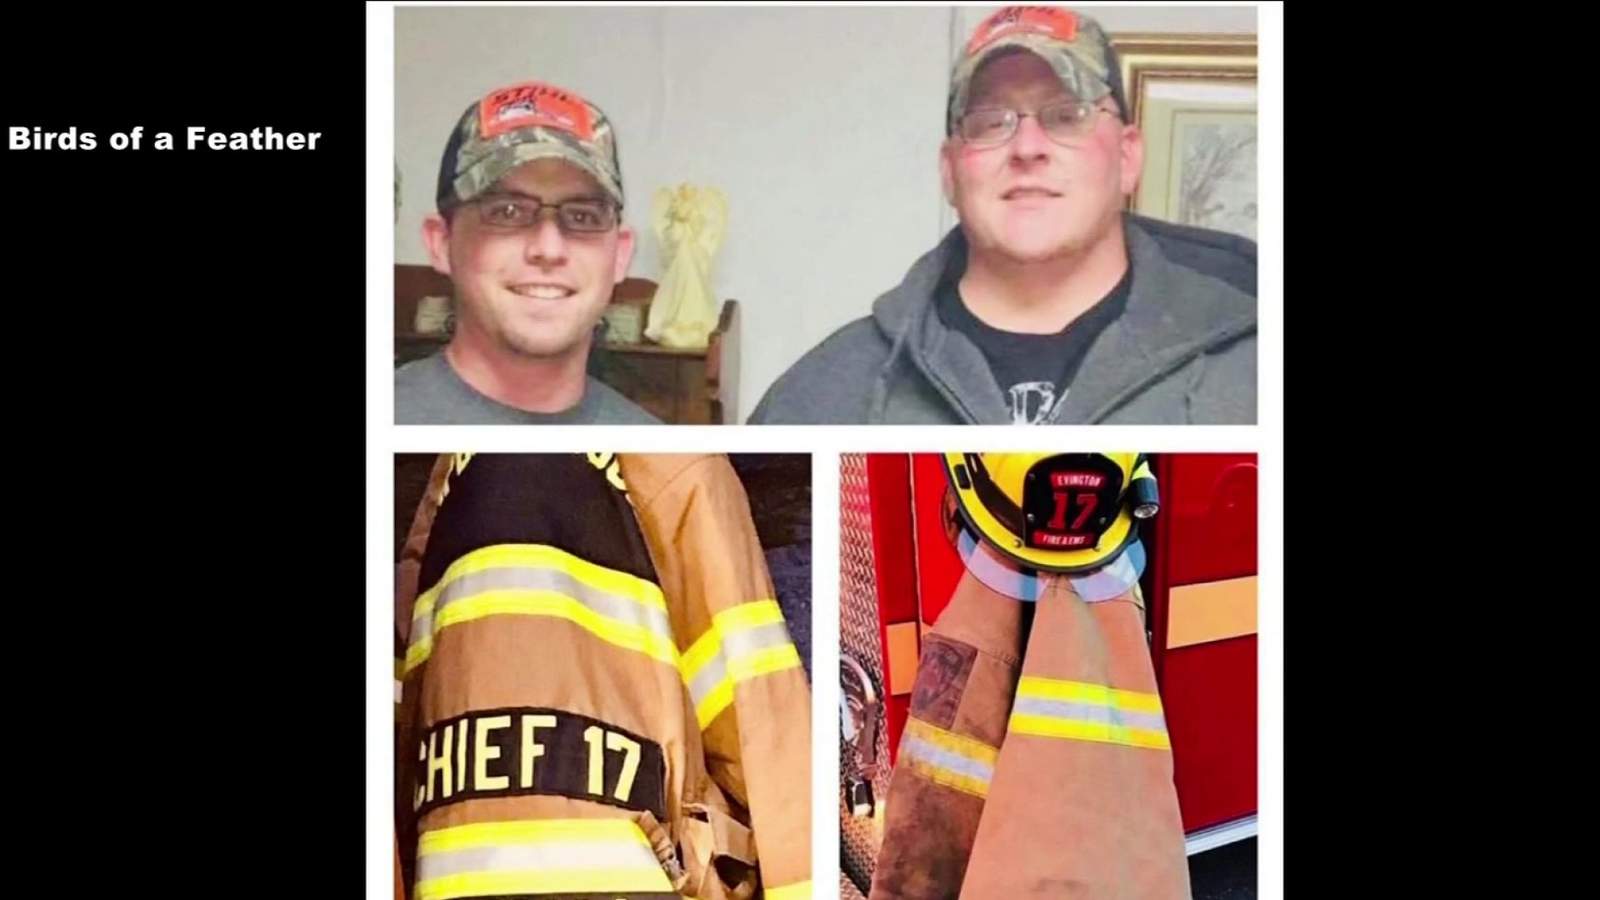 Fundraiser created to help Evington firefighters seriously injured in ATV accident